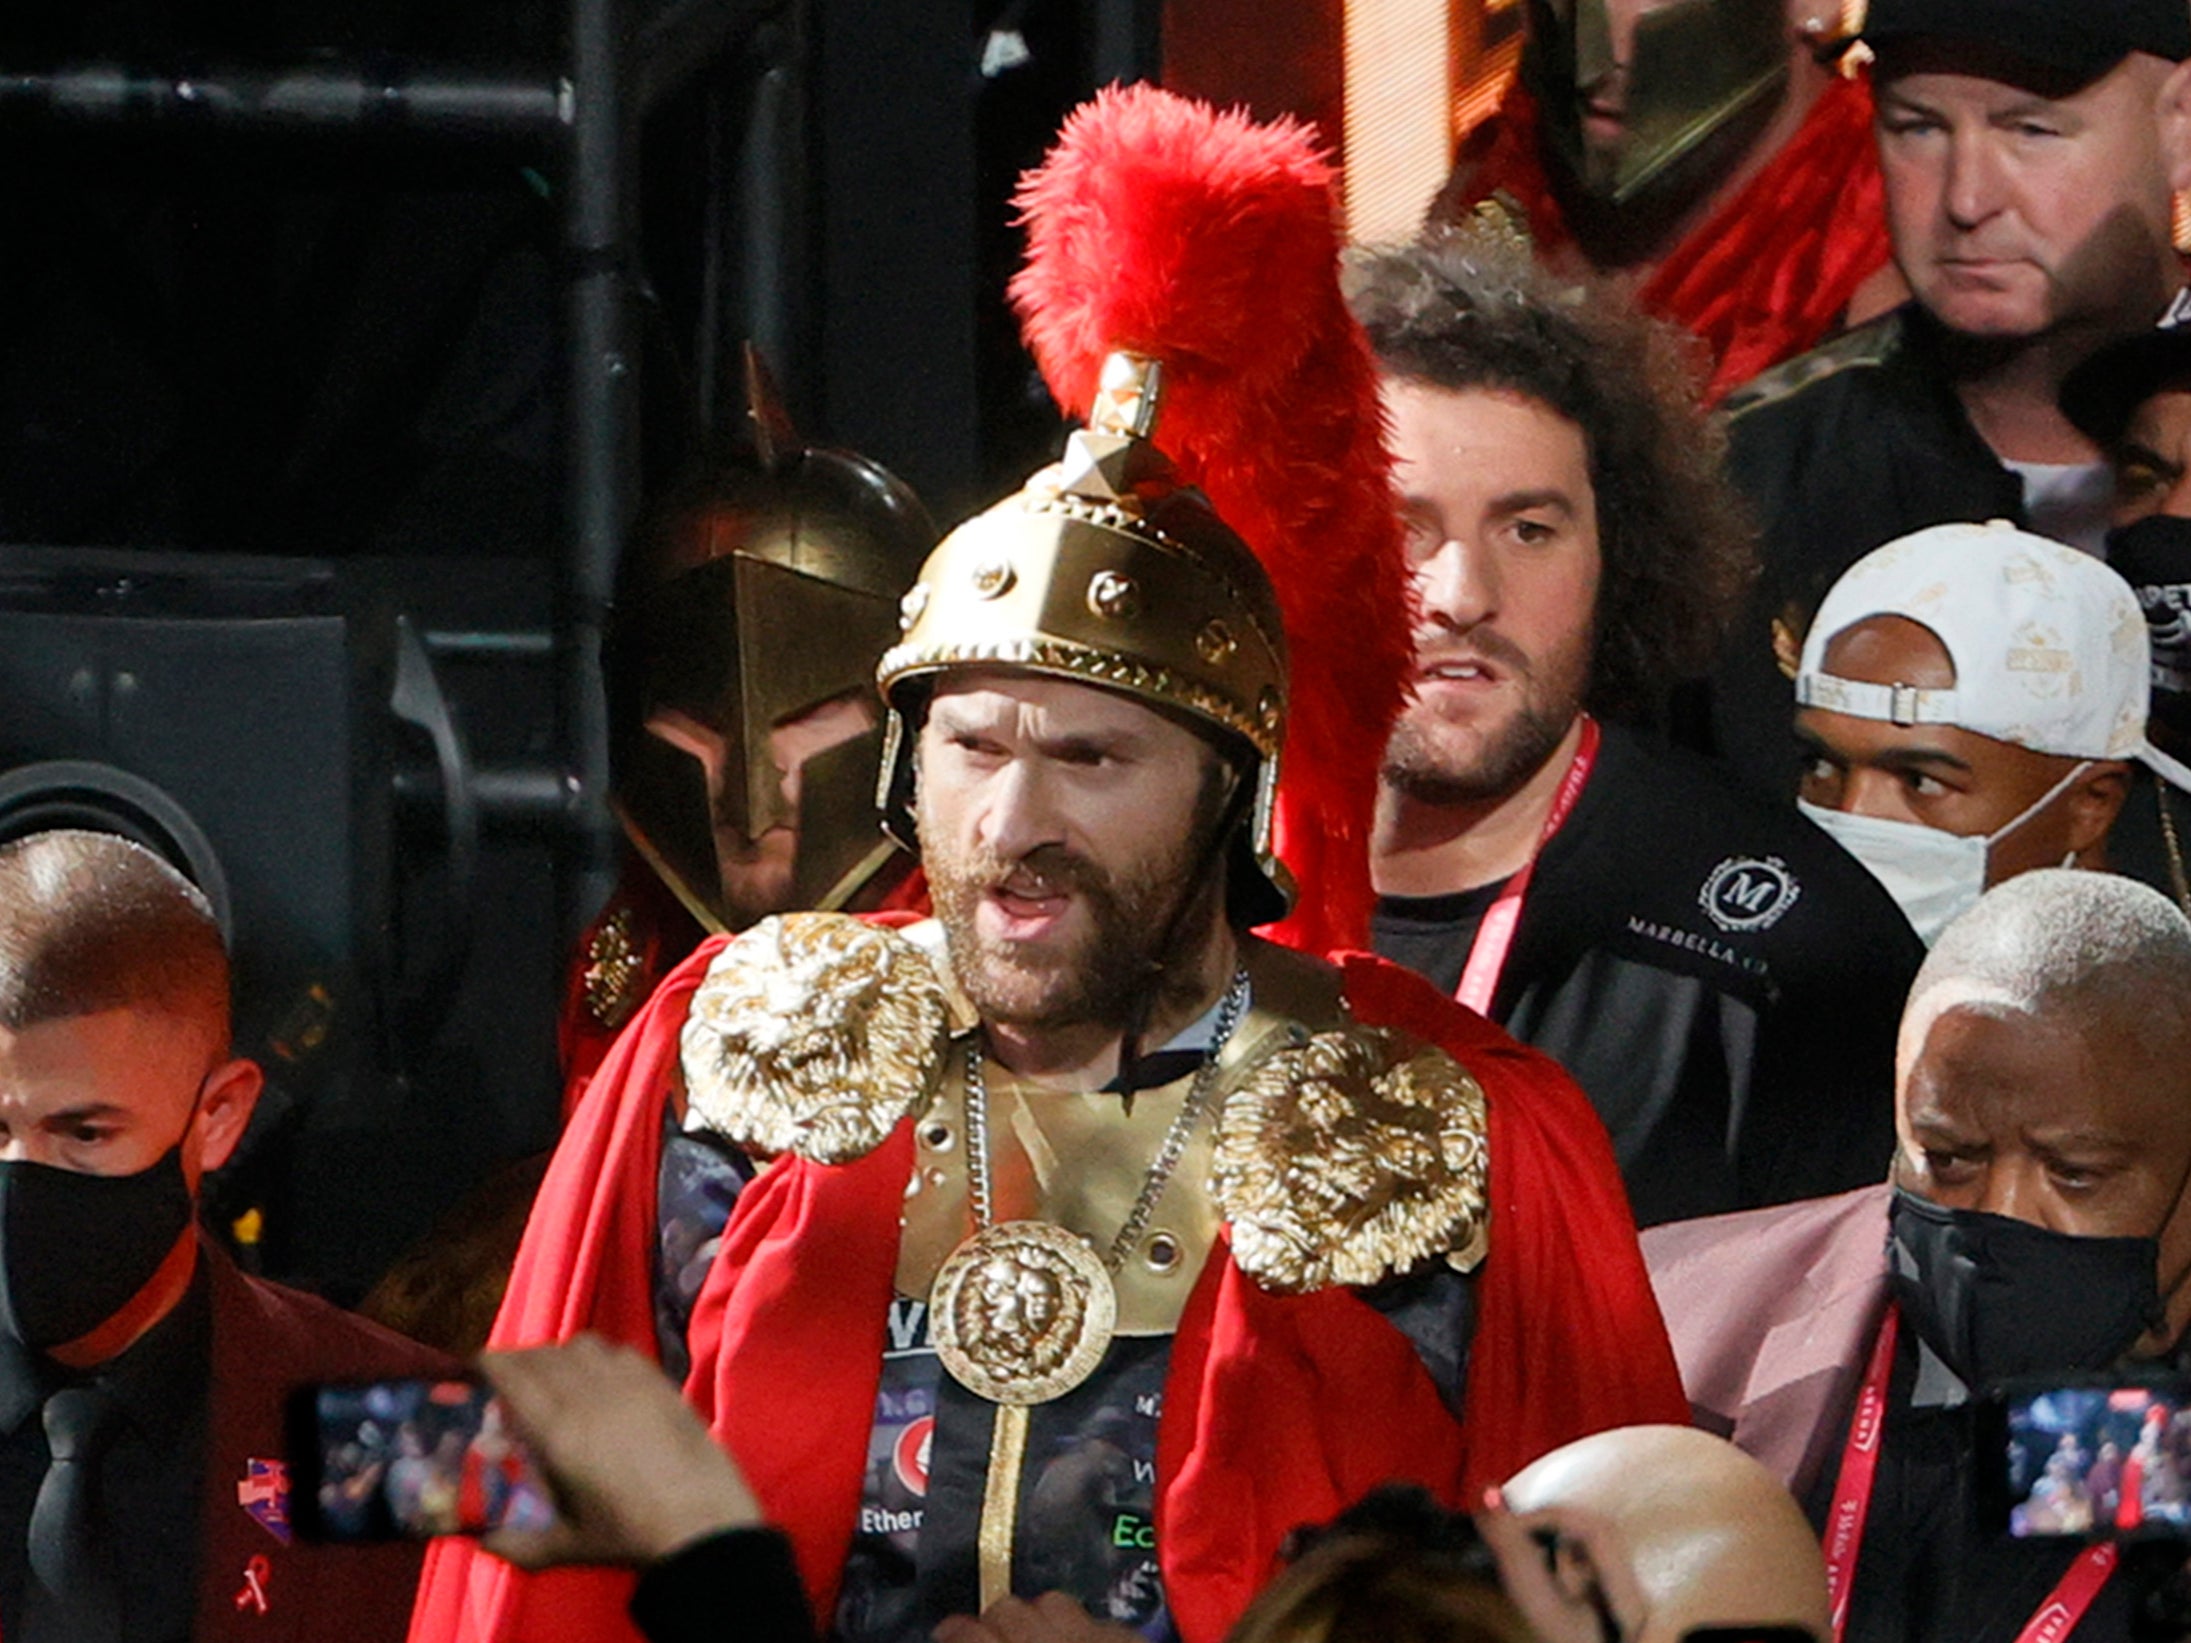 Tyson Fury makes his ring entrance for his WBC heavyweight title fight against Deontay Wilder